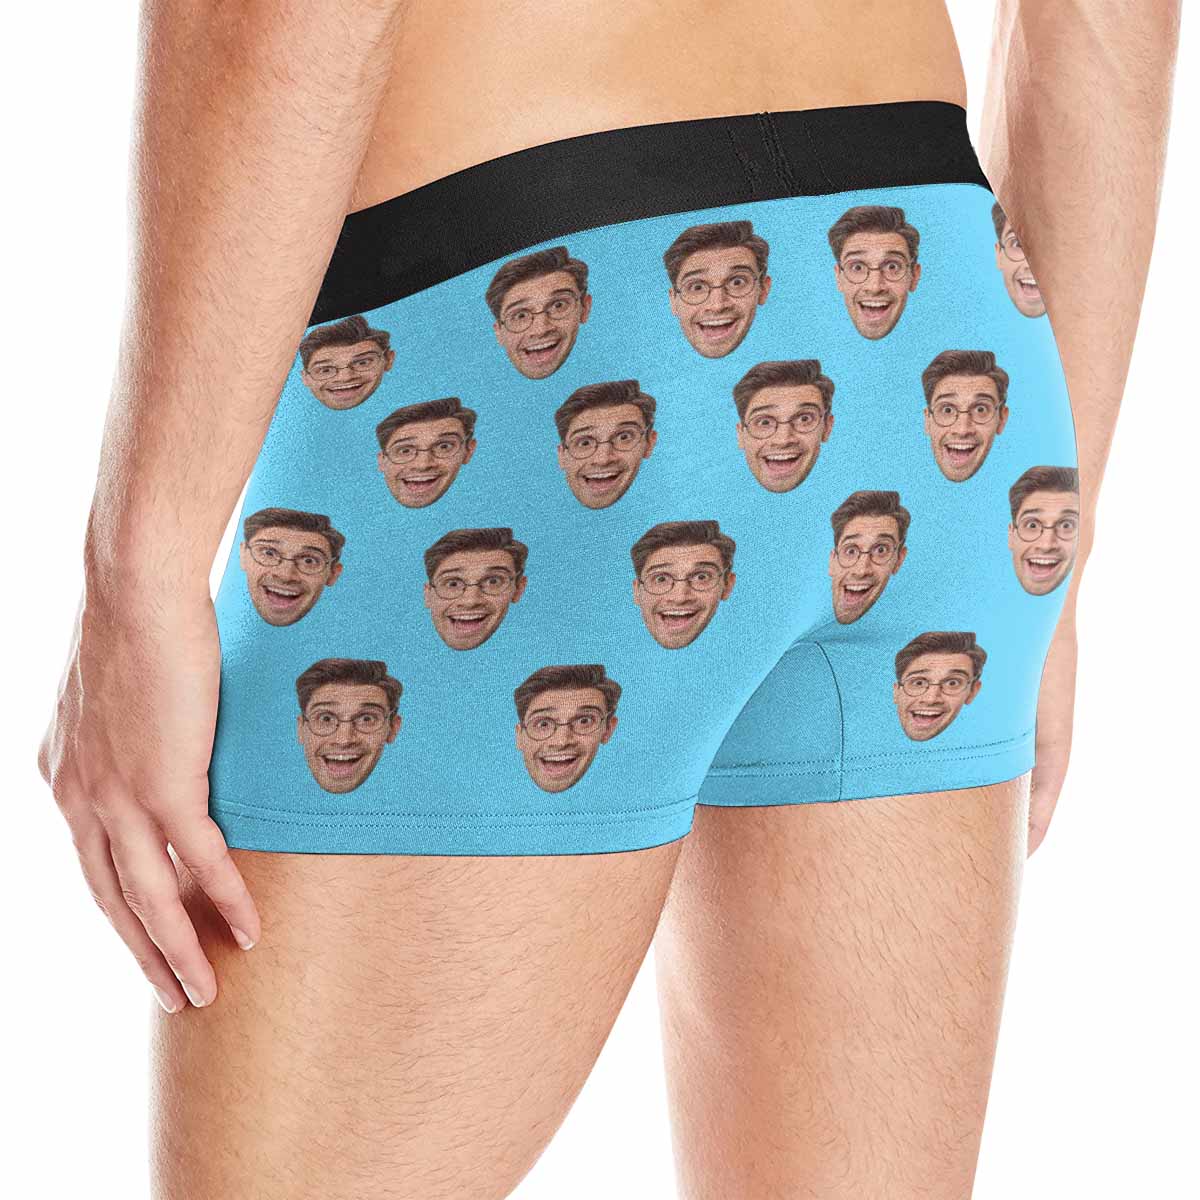 Custom Boxers with Face, Personalized Photo Print Underwear, Boxer